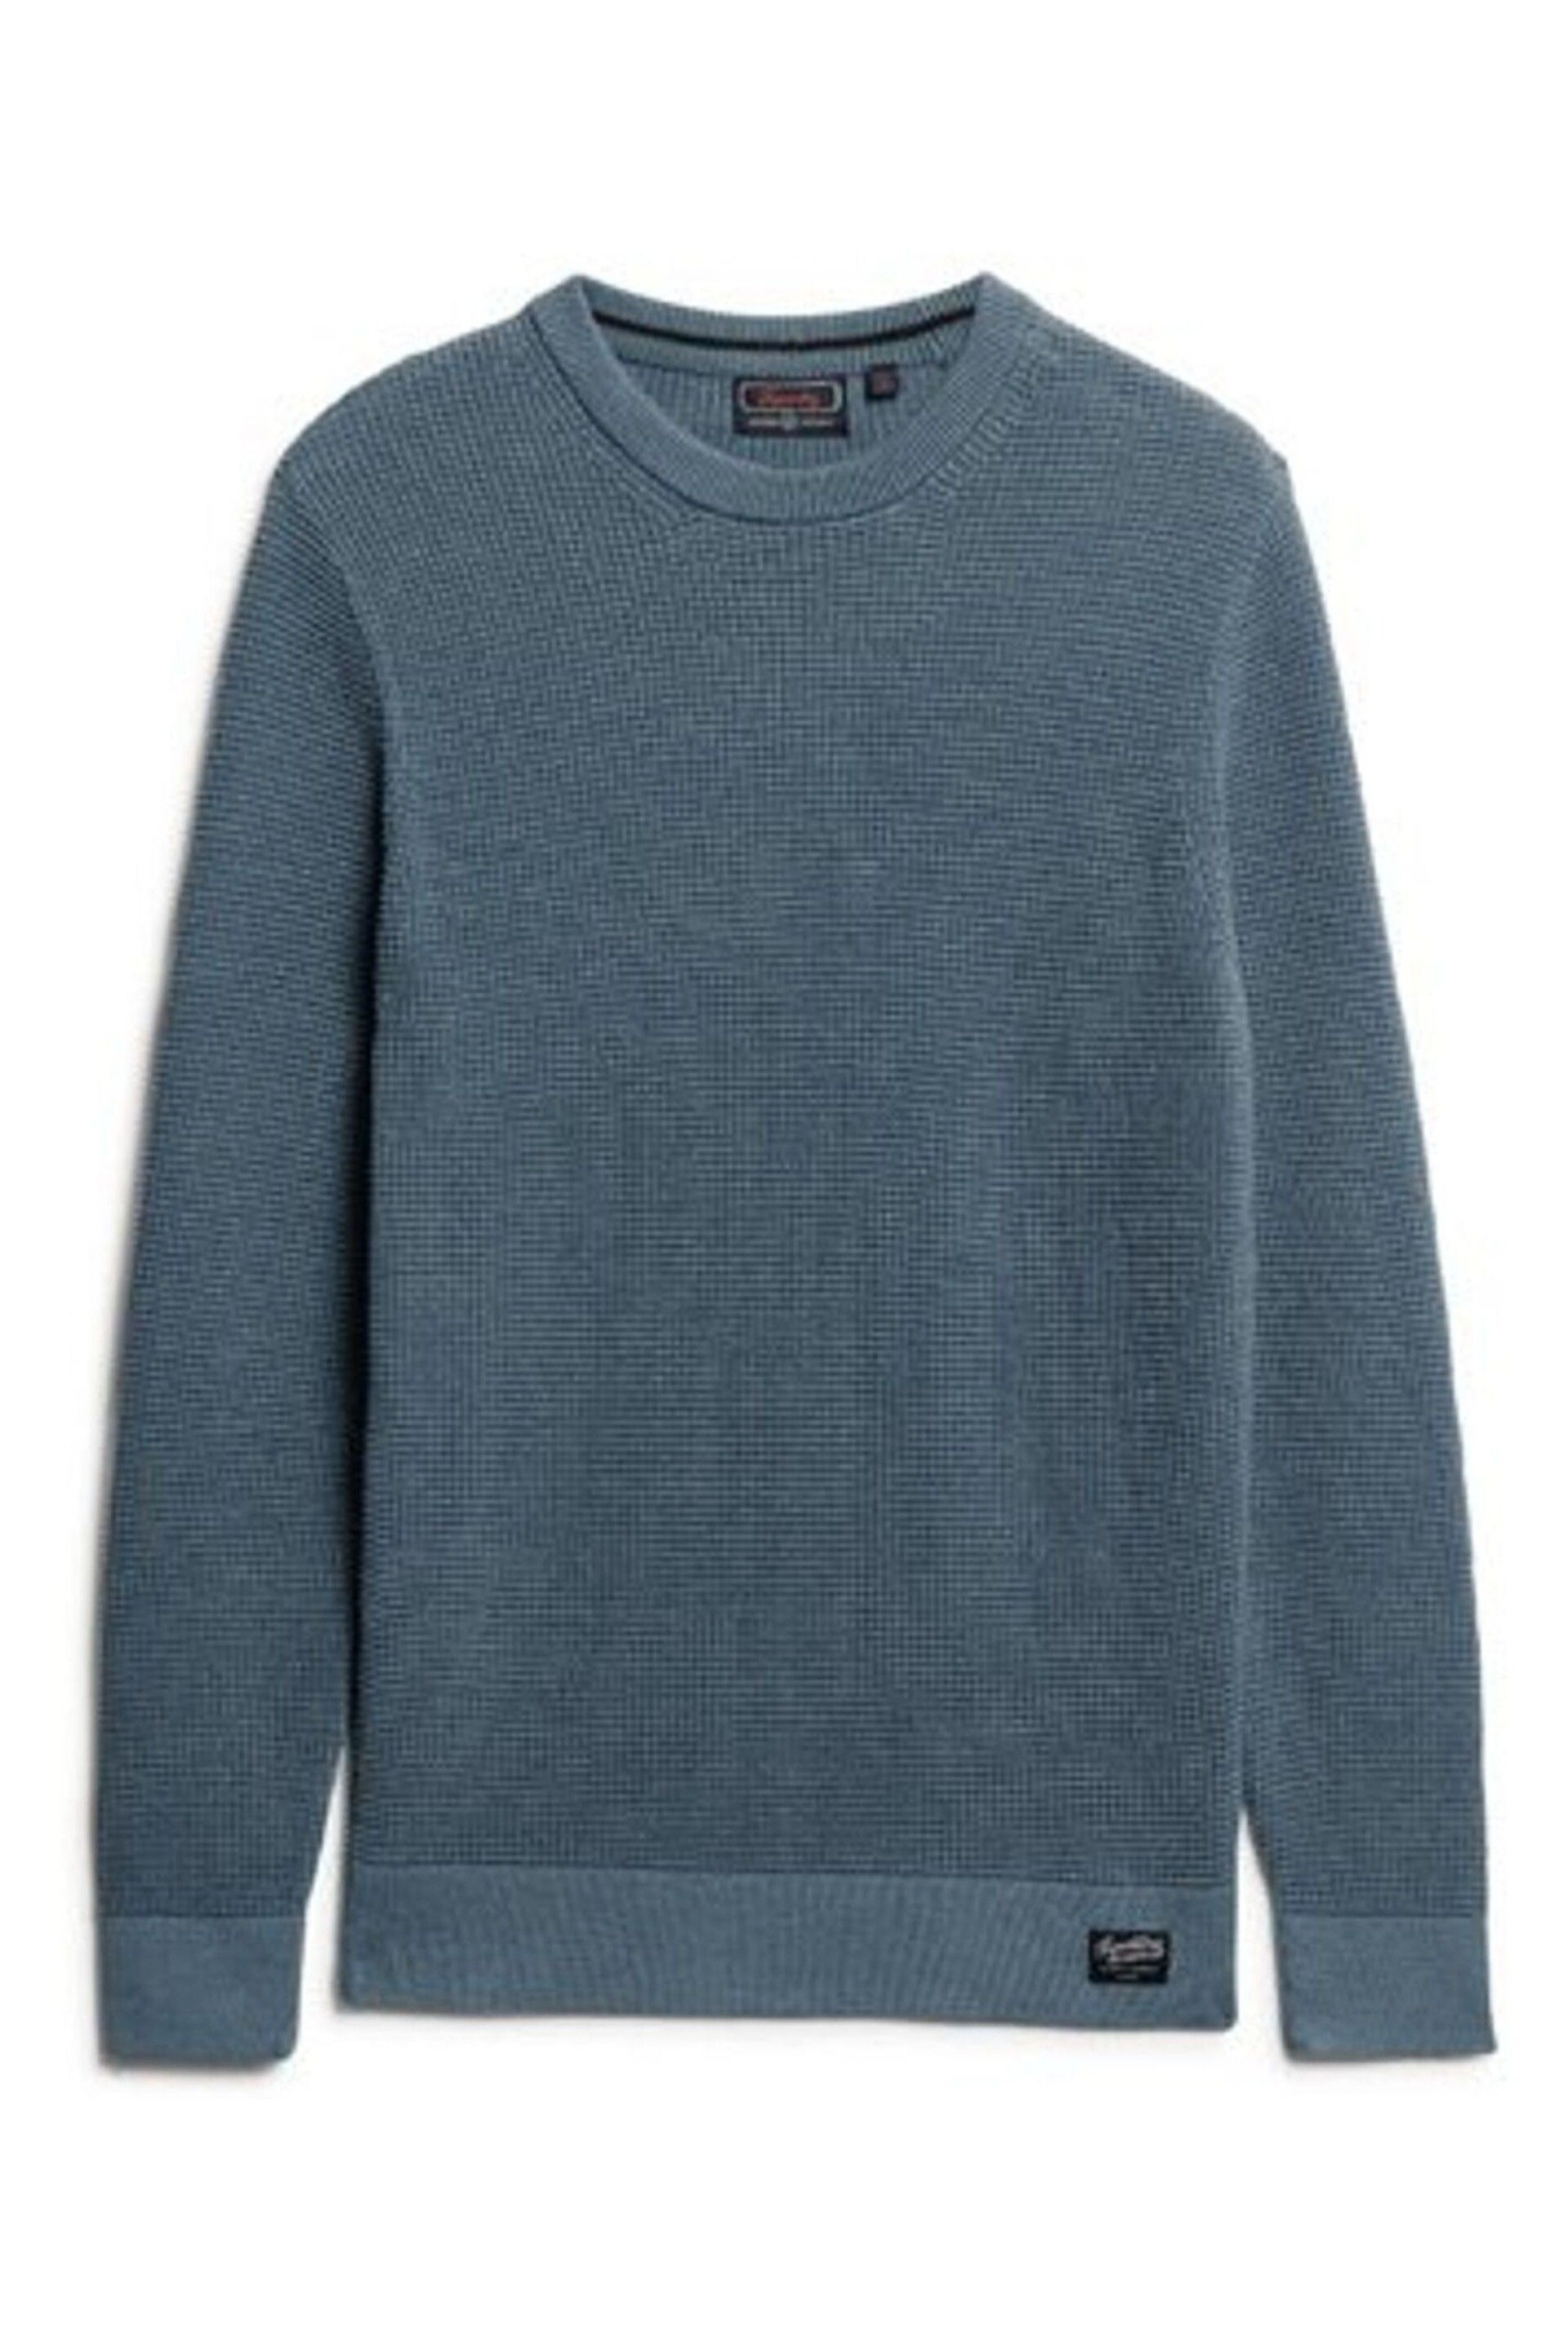 Superdry Blue Chrome Textured Crew Knit Jumper - Image 4 of 6